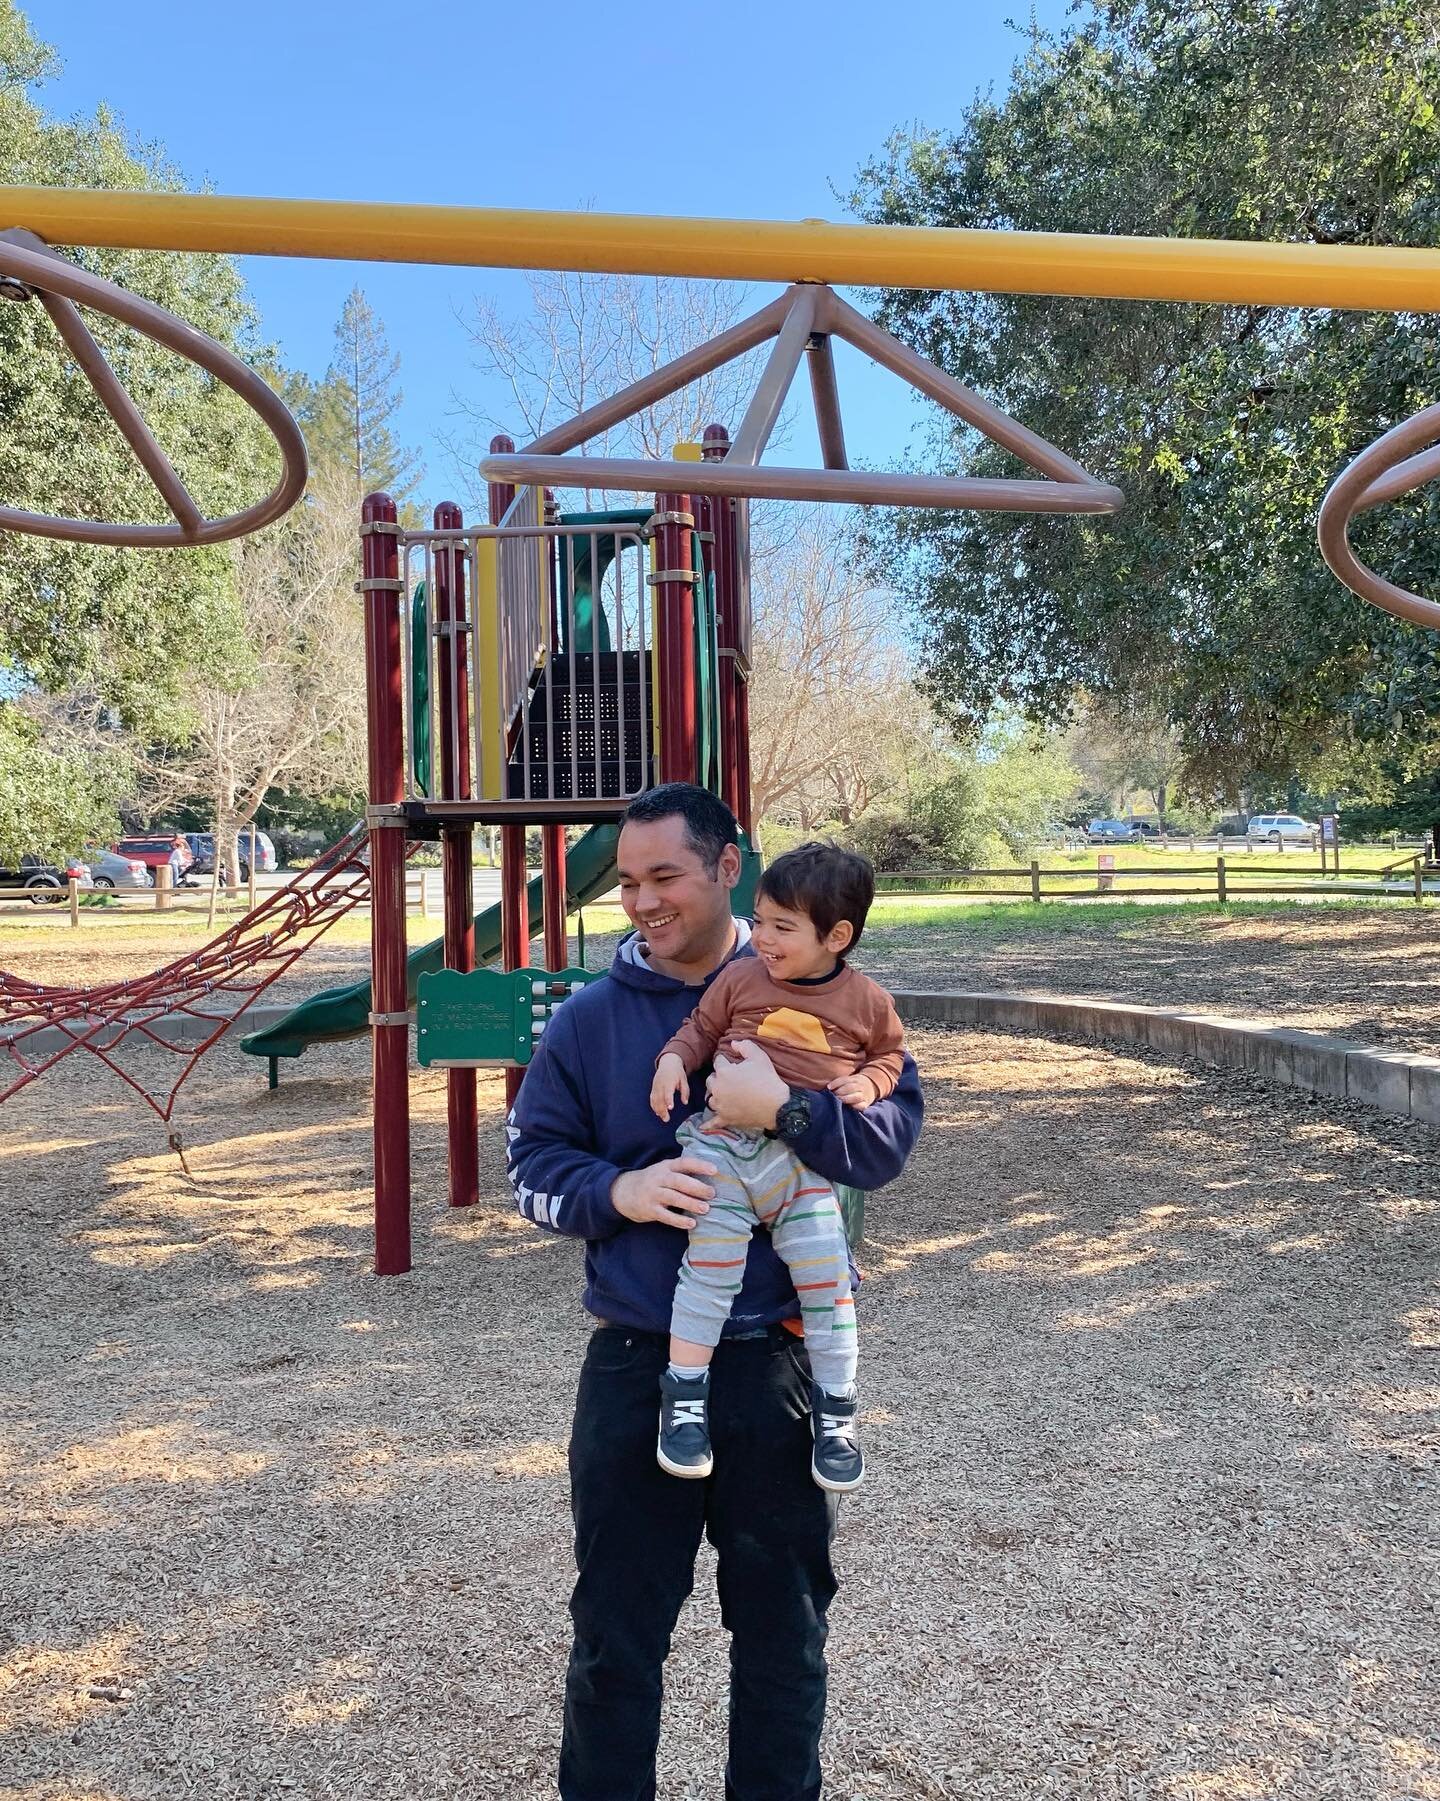 2.27.22
Second family park day in a row while we wait for sister&rsquo;s arrival. I&rsquo;m going on a month and a half of labor symptoms and nearly out of mobility but getting time with these two feels more special than ever.
#asaphallen